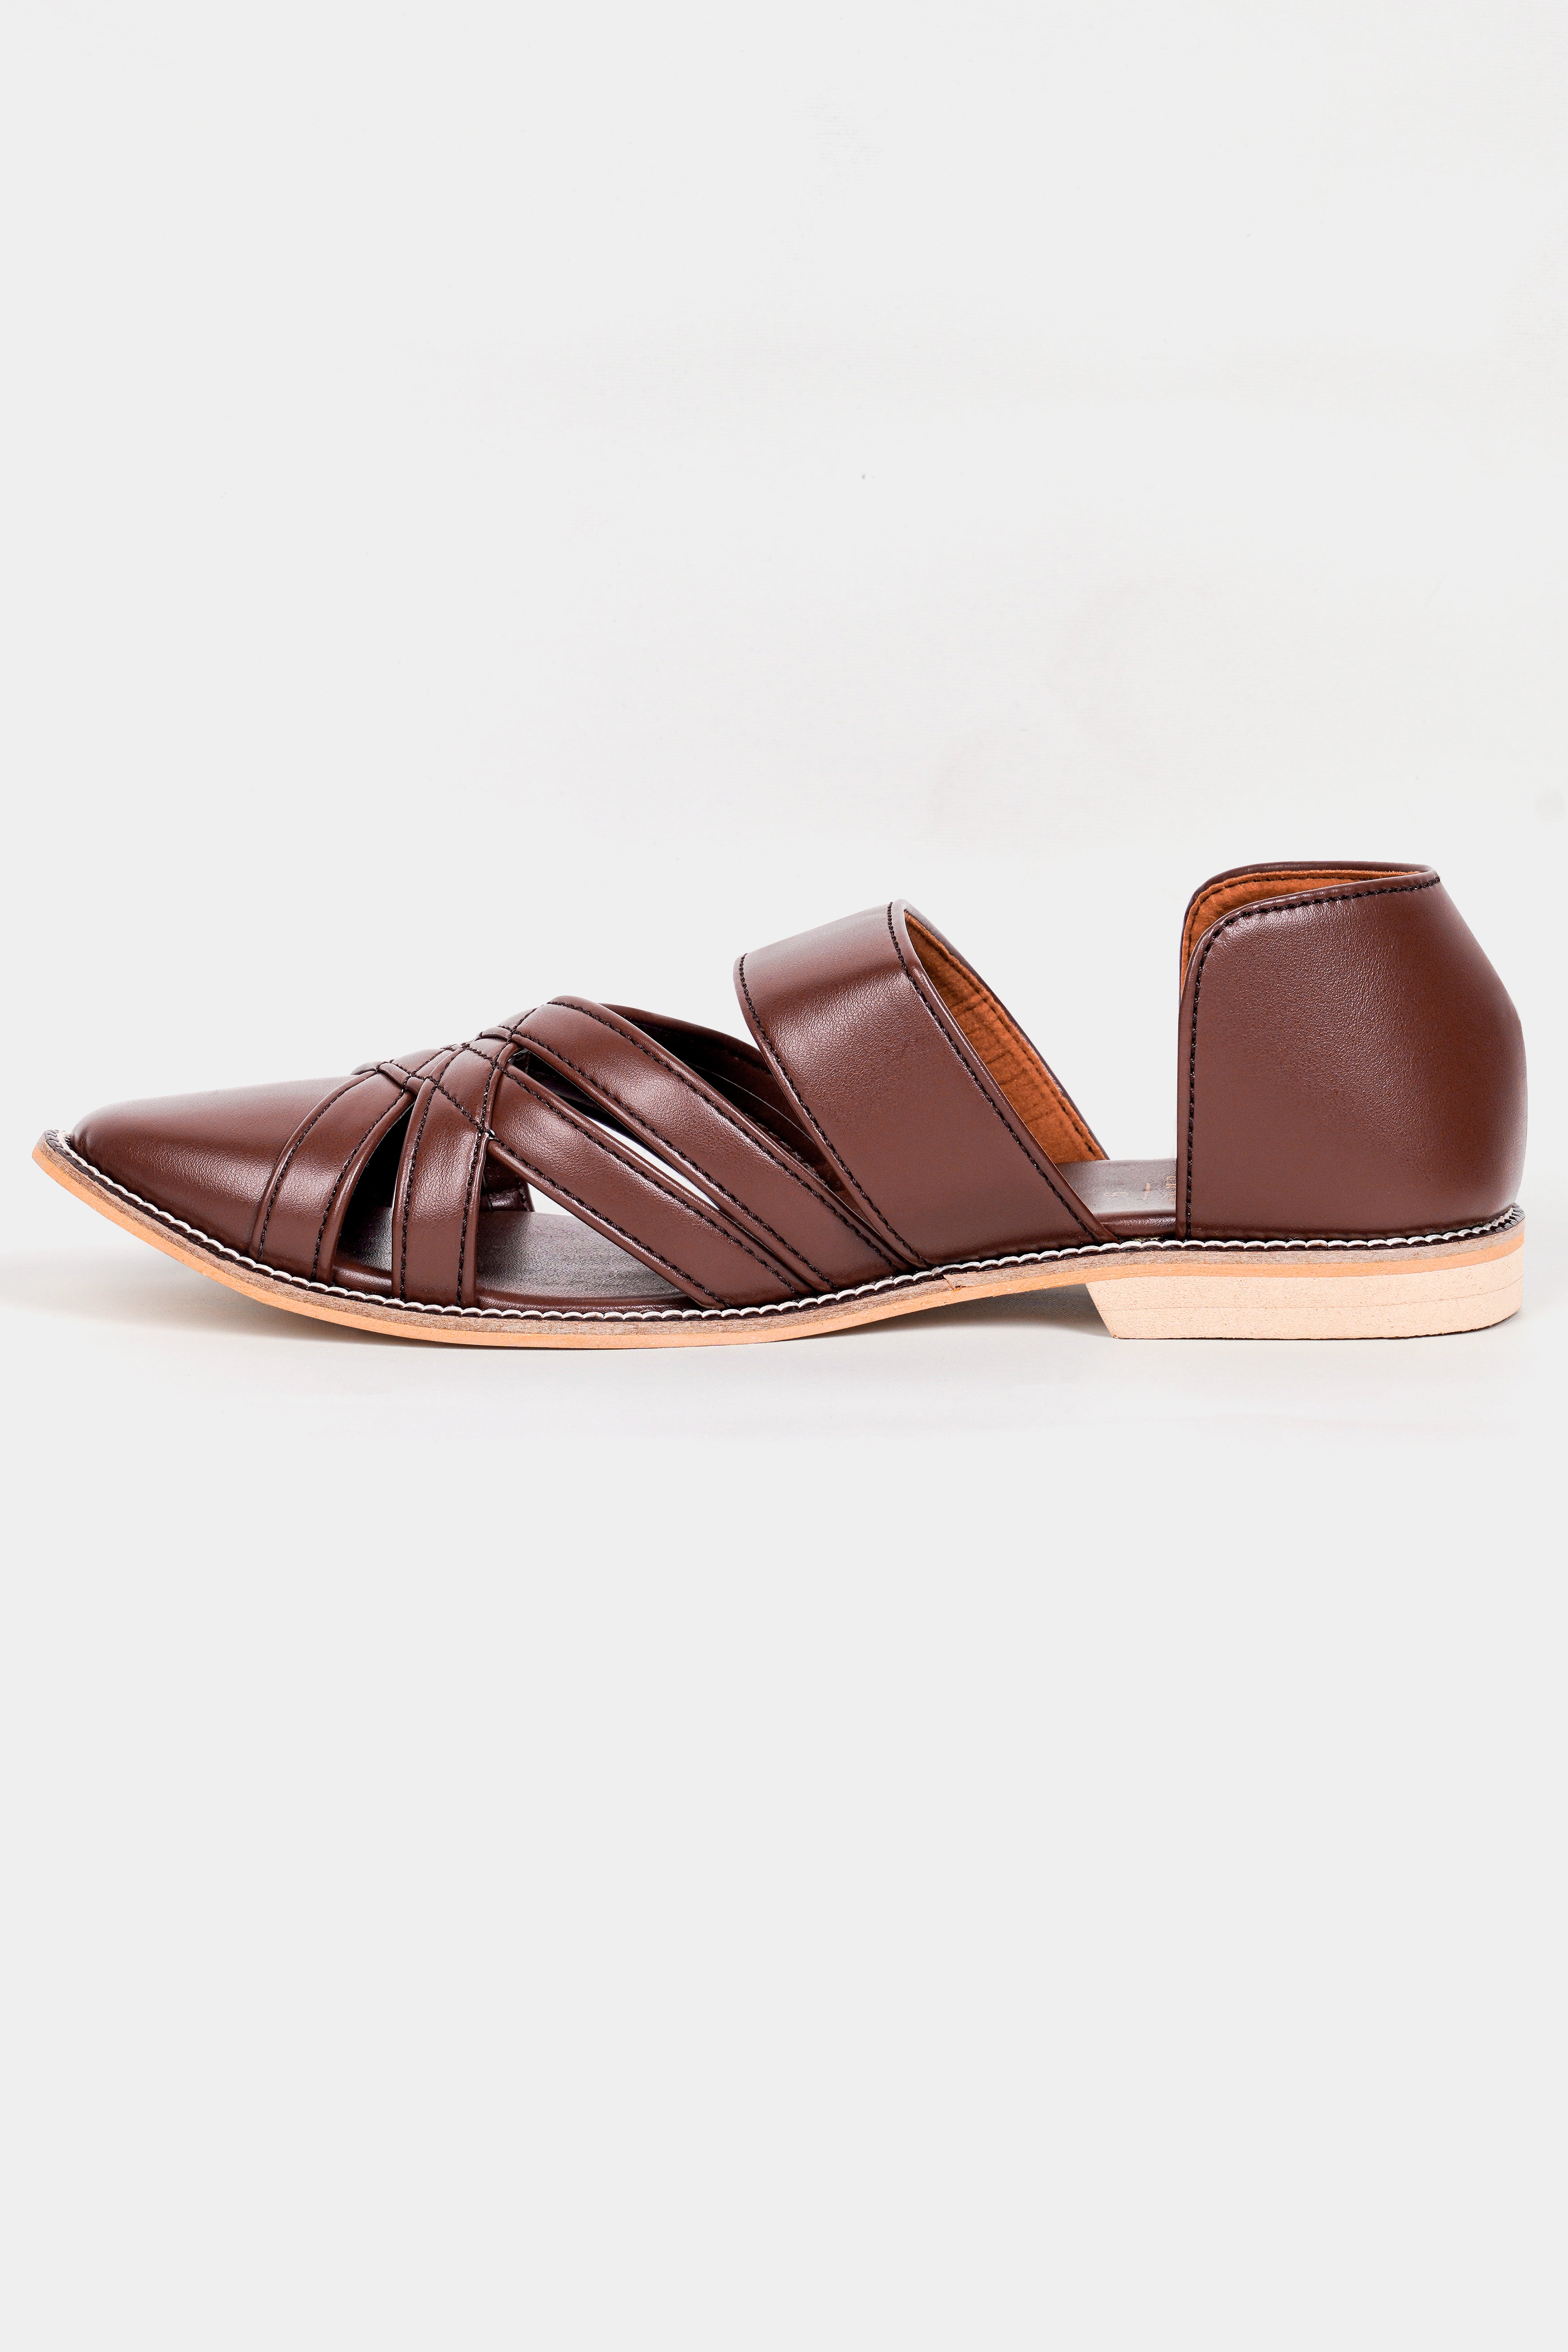 Brown Criss Cross Vegan Leather Hand Stitched Pathanis Sandal FT126-6, FT126-7, FT126-8, FT126-9, FT126-10, FT126-11